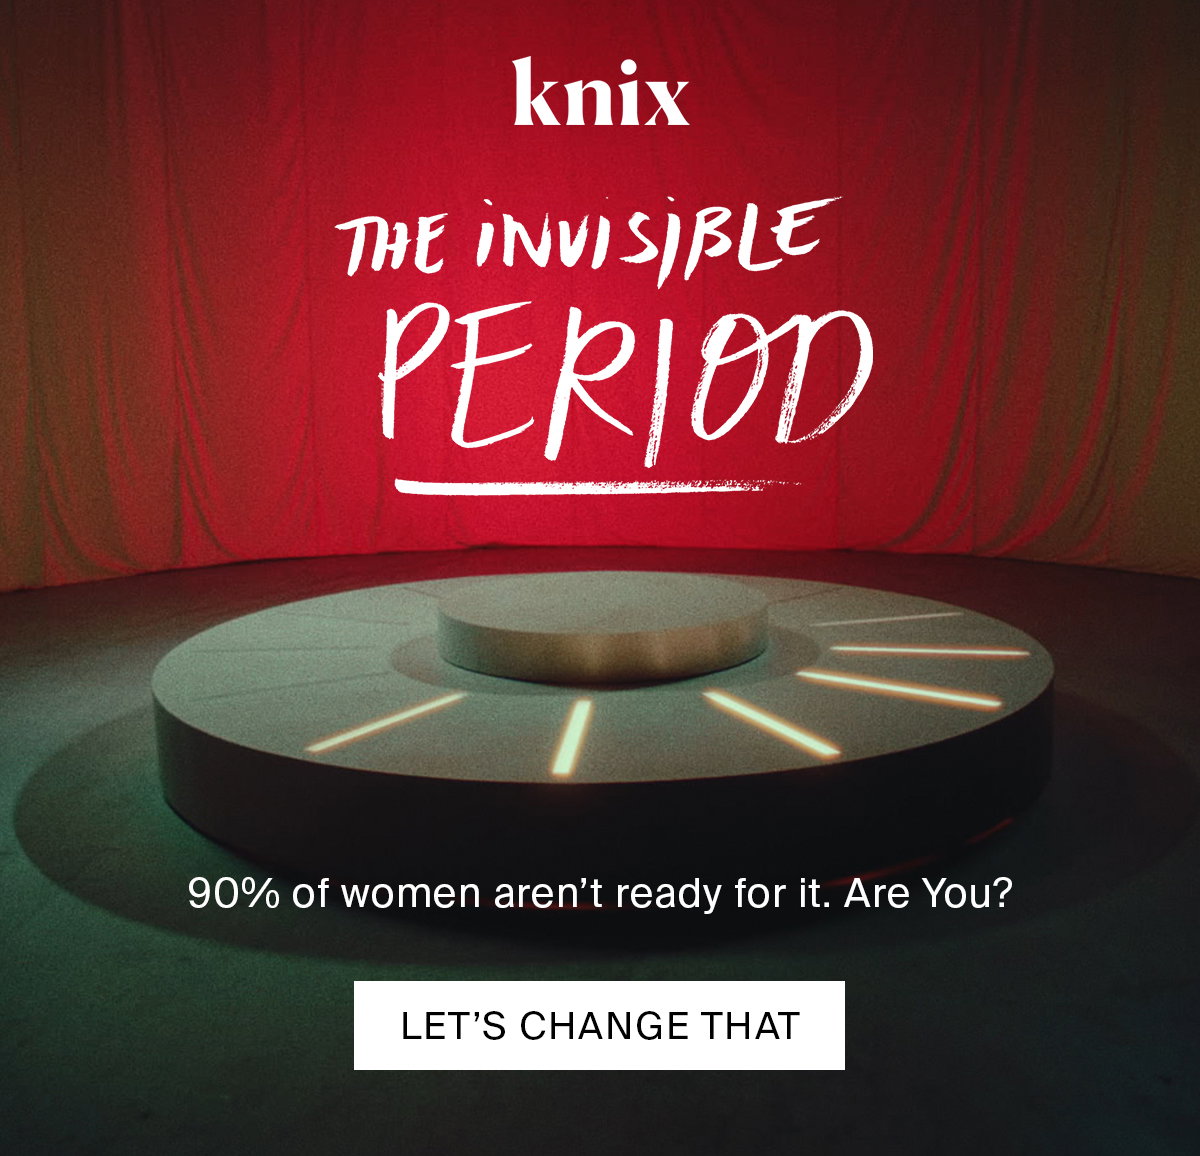 Women Over 50 Exist - A Message From Knix 